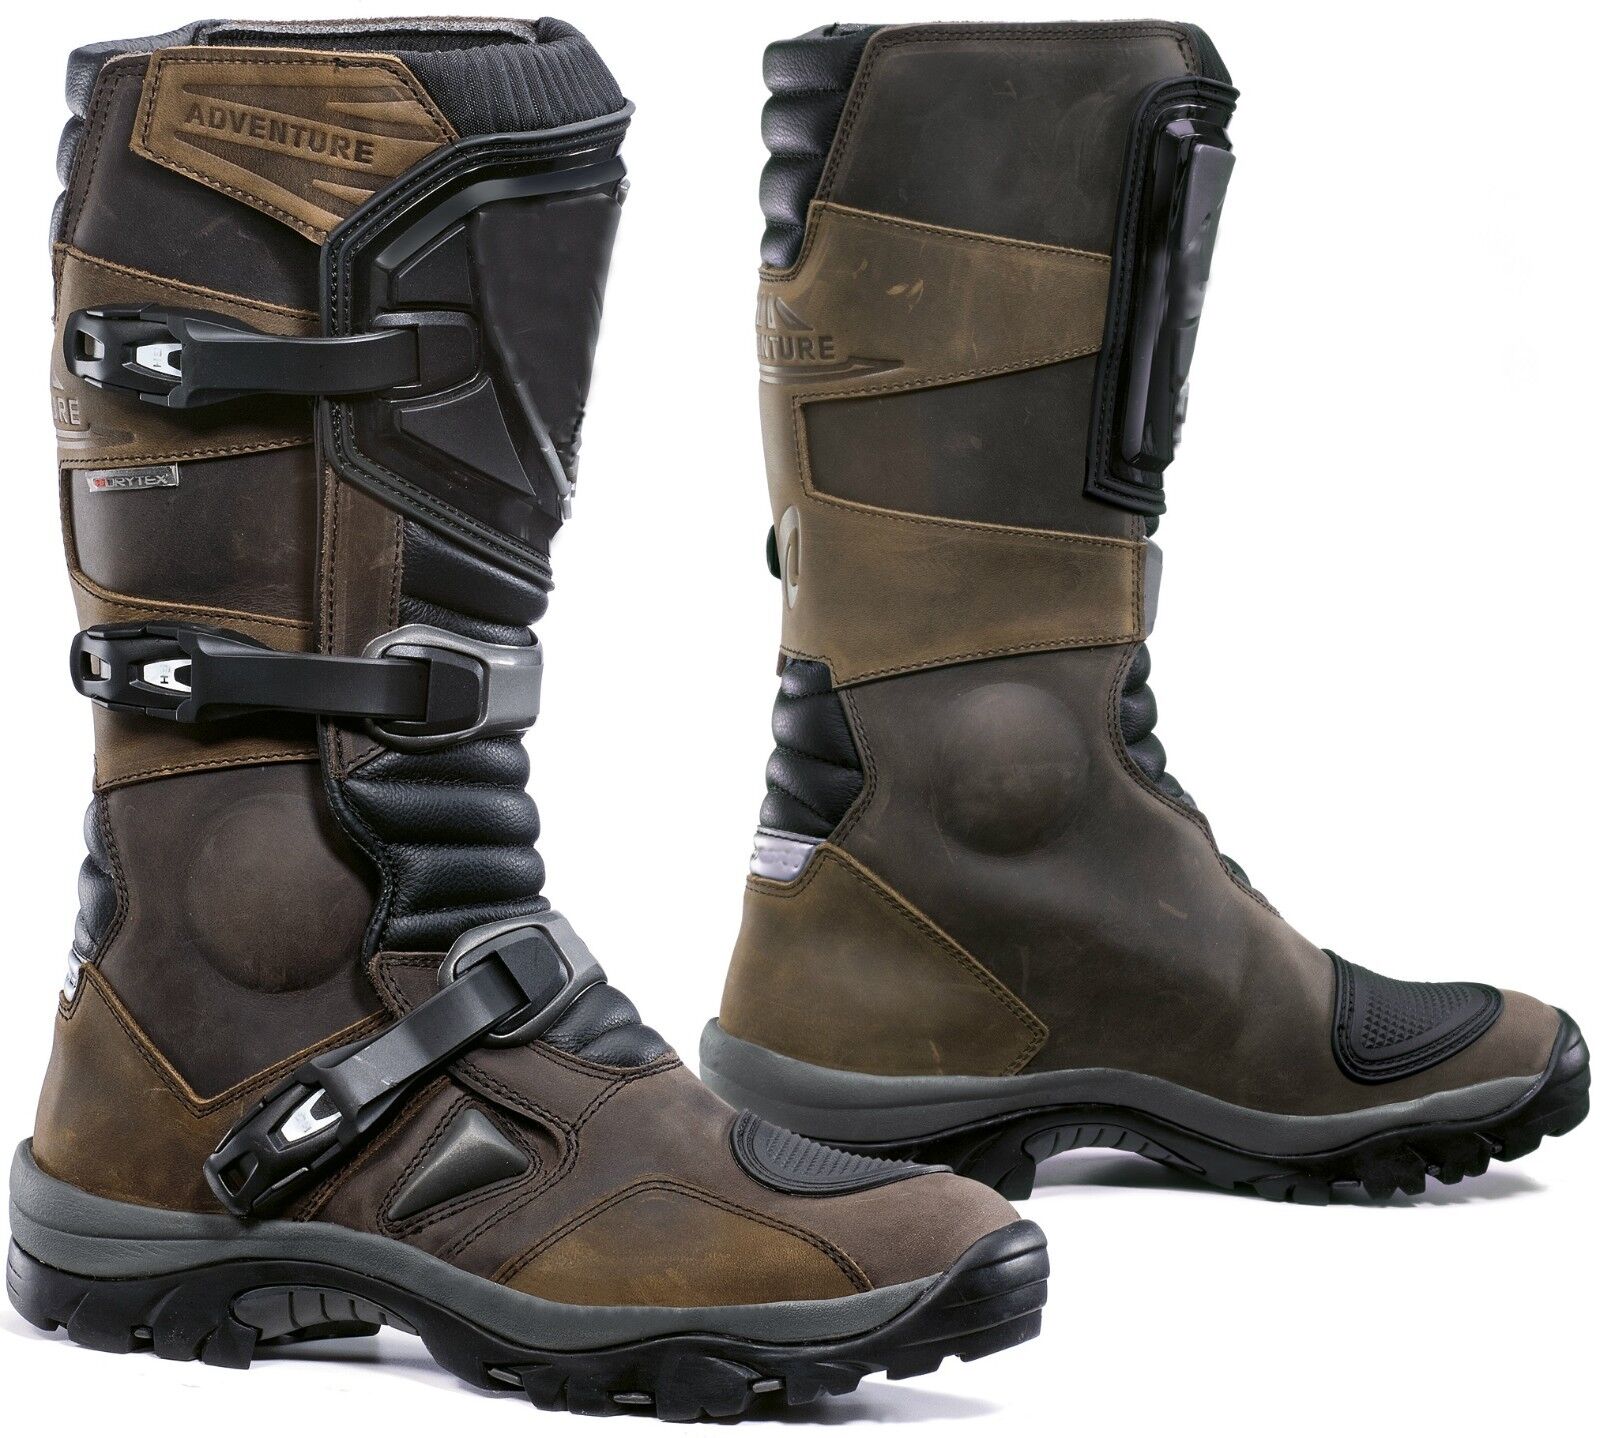 motorcycle boots | Forma Adventure brown waterproof adv touring dual road riding